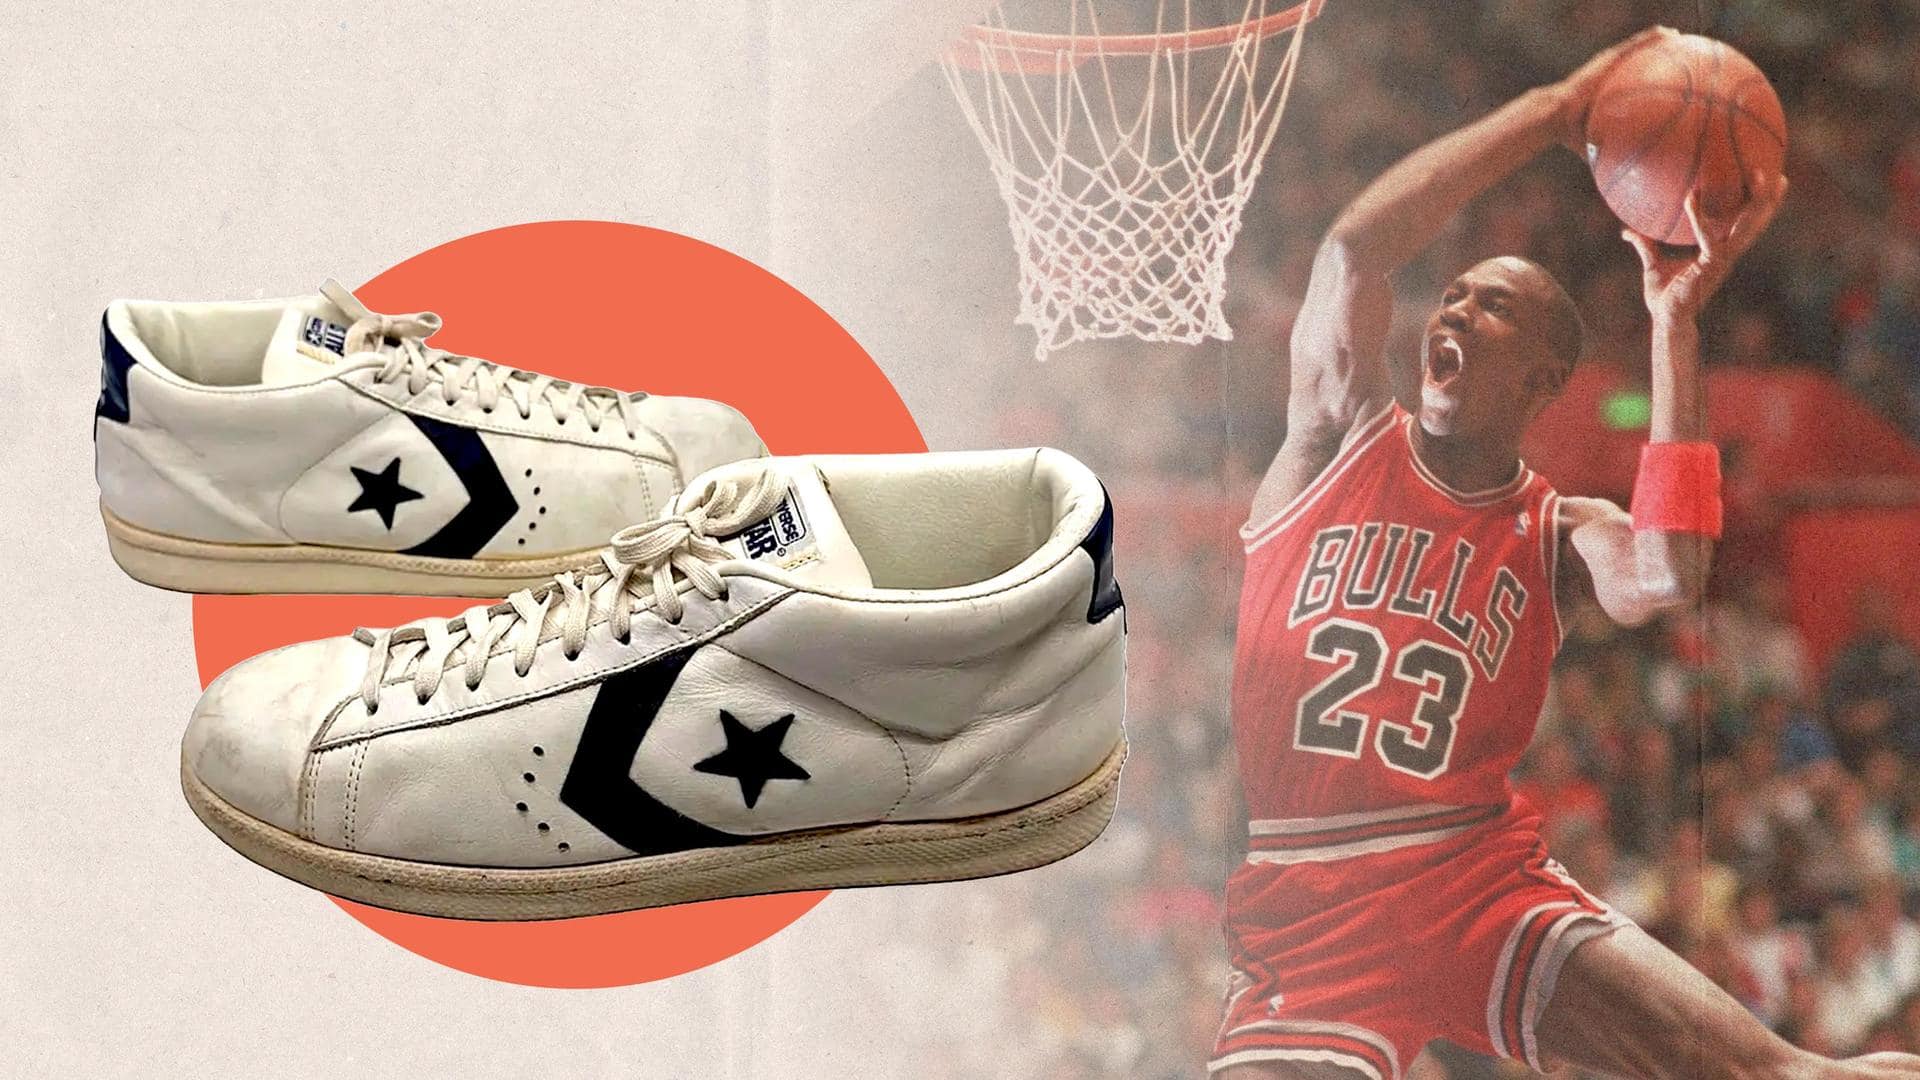 Michael Jordan's game-worn shoes are now auction